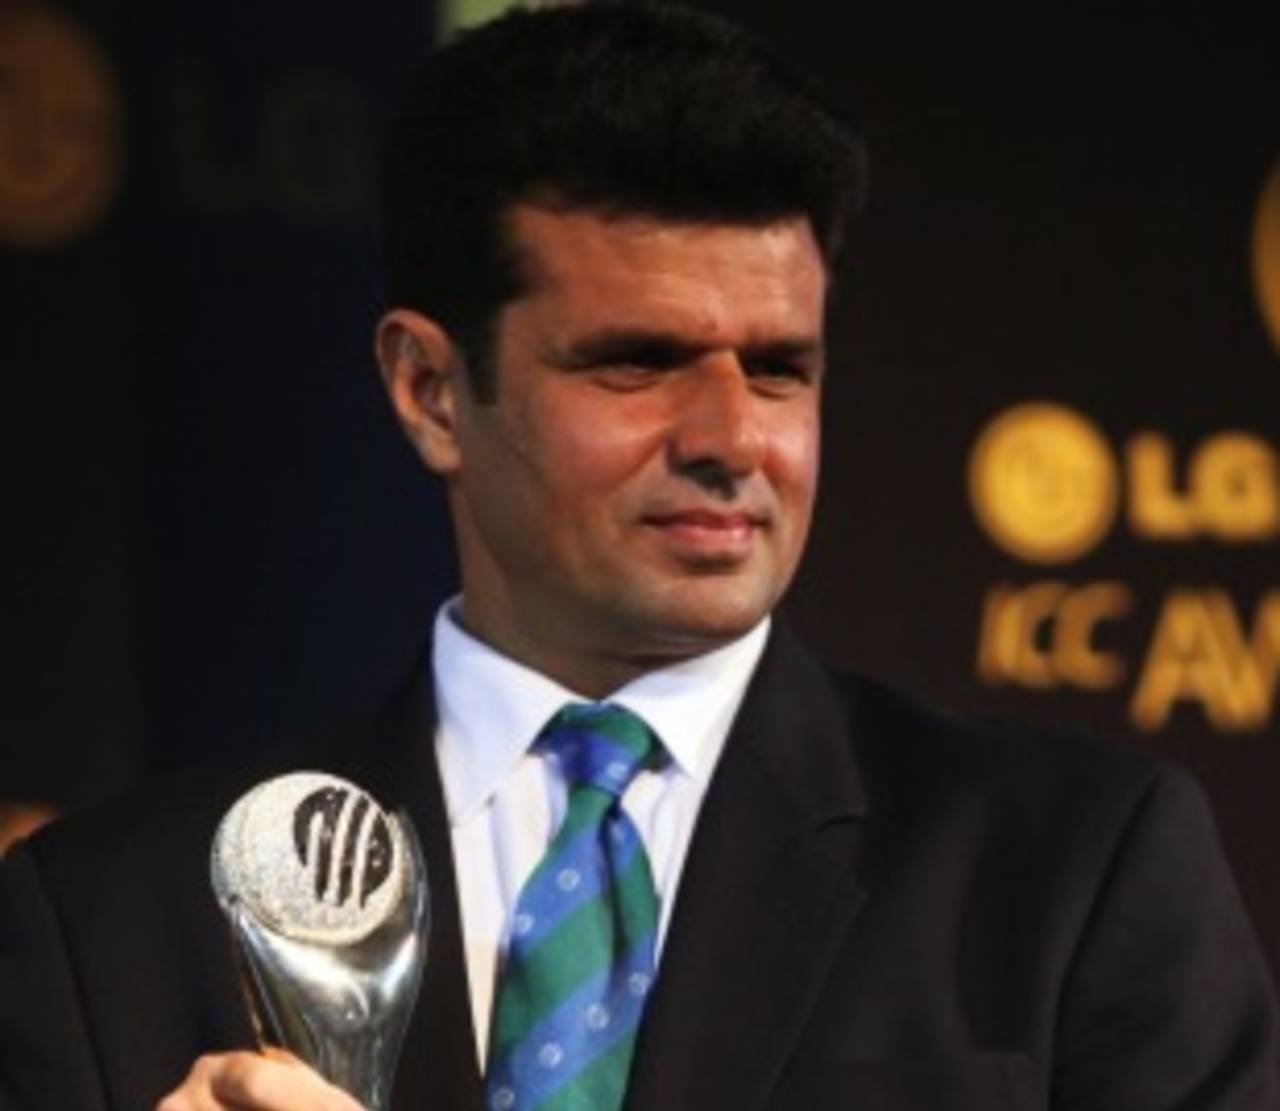 Aleem Dar retained his Umpire of the Year award at the 2010 ICC Awards, Bangalore, October 6, 2010